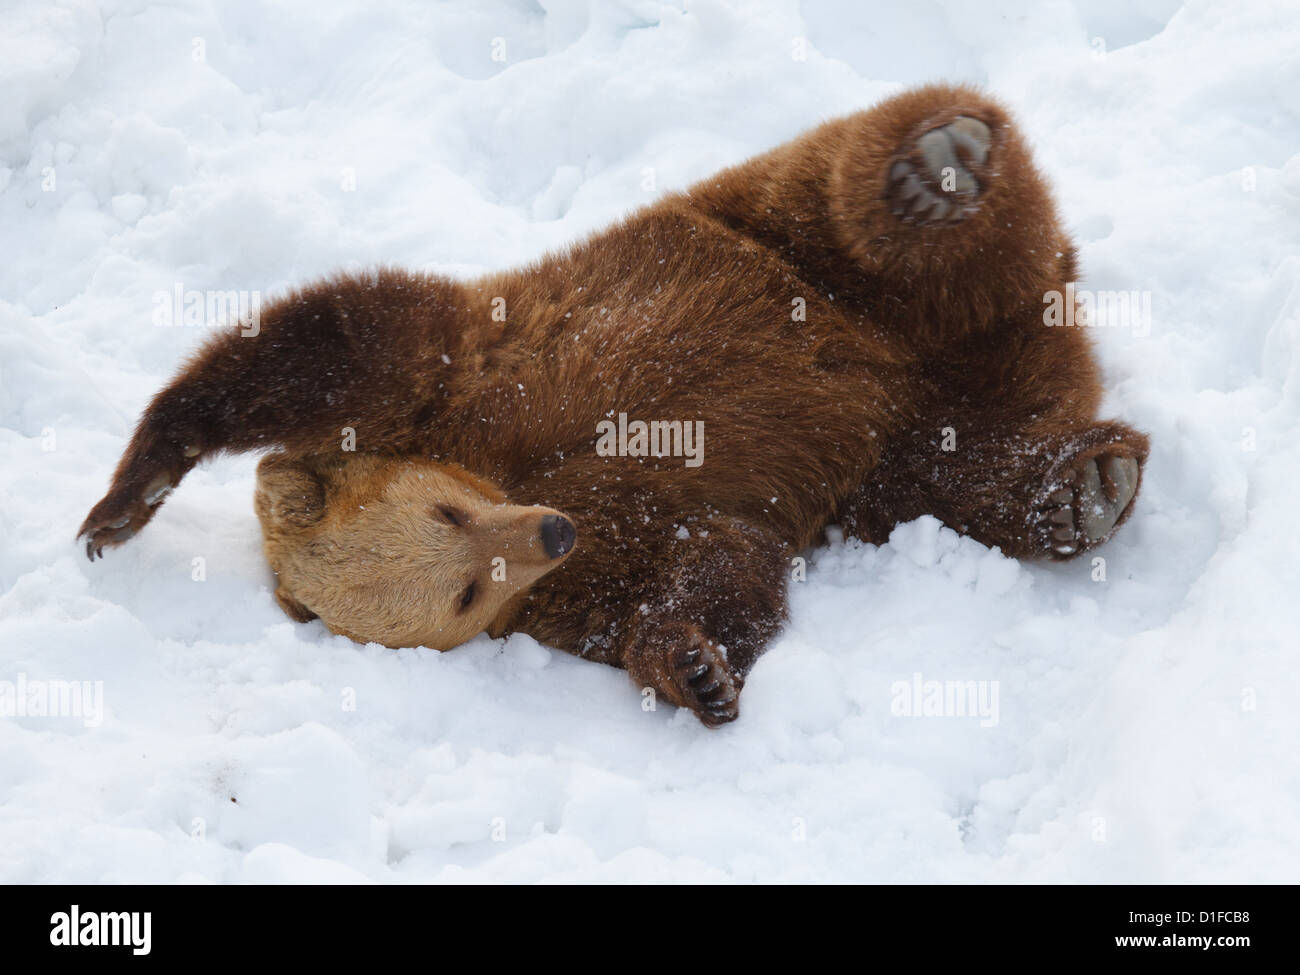 Bear enjoys the spring snow after waking up from his winter hibernation. Stock Photo